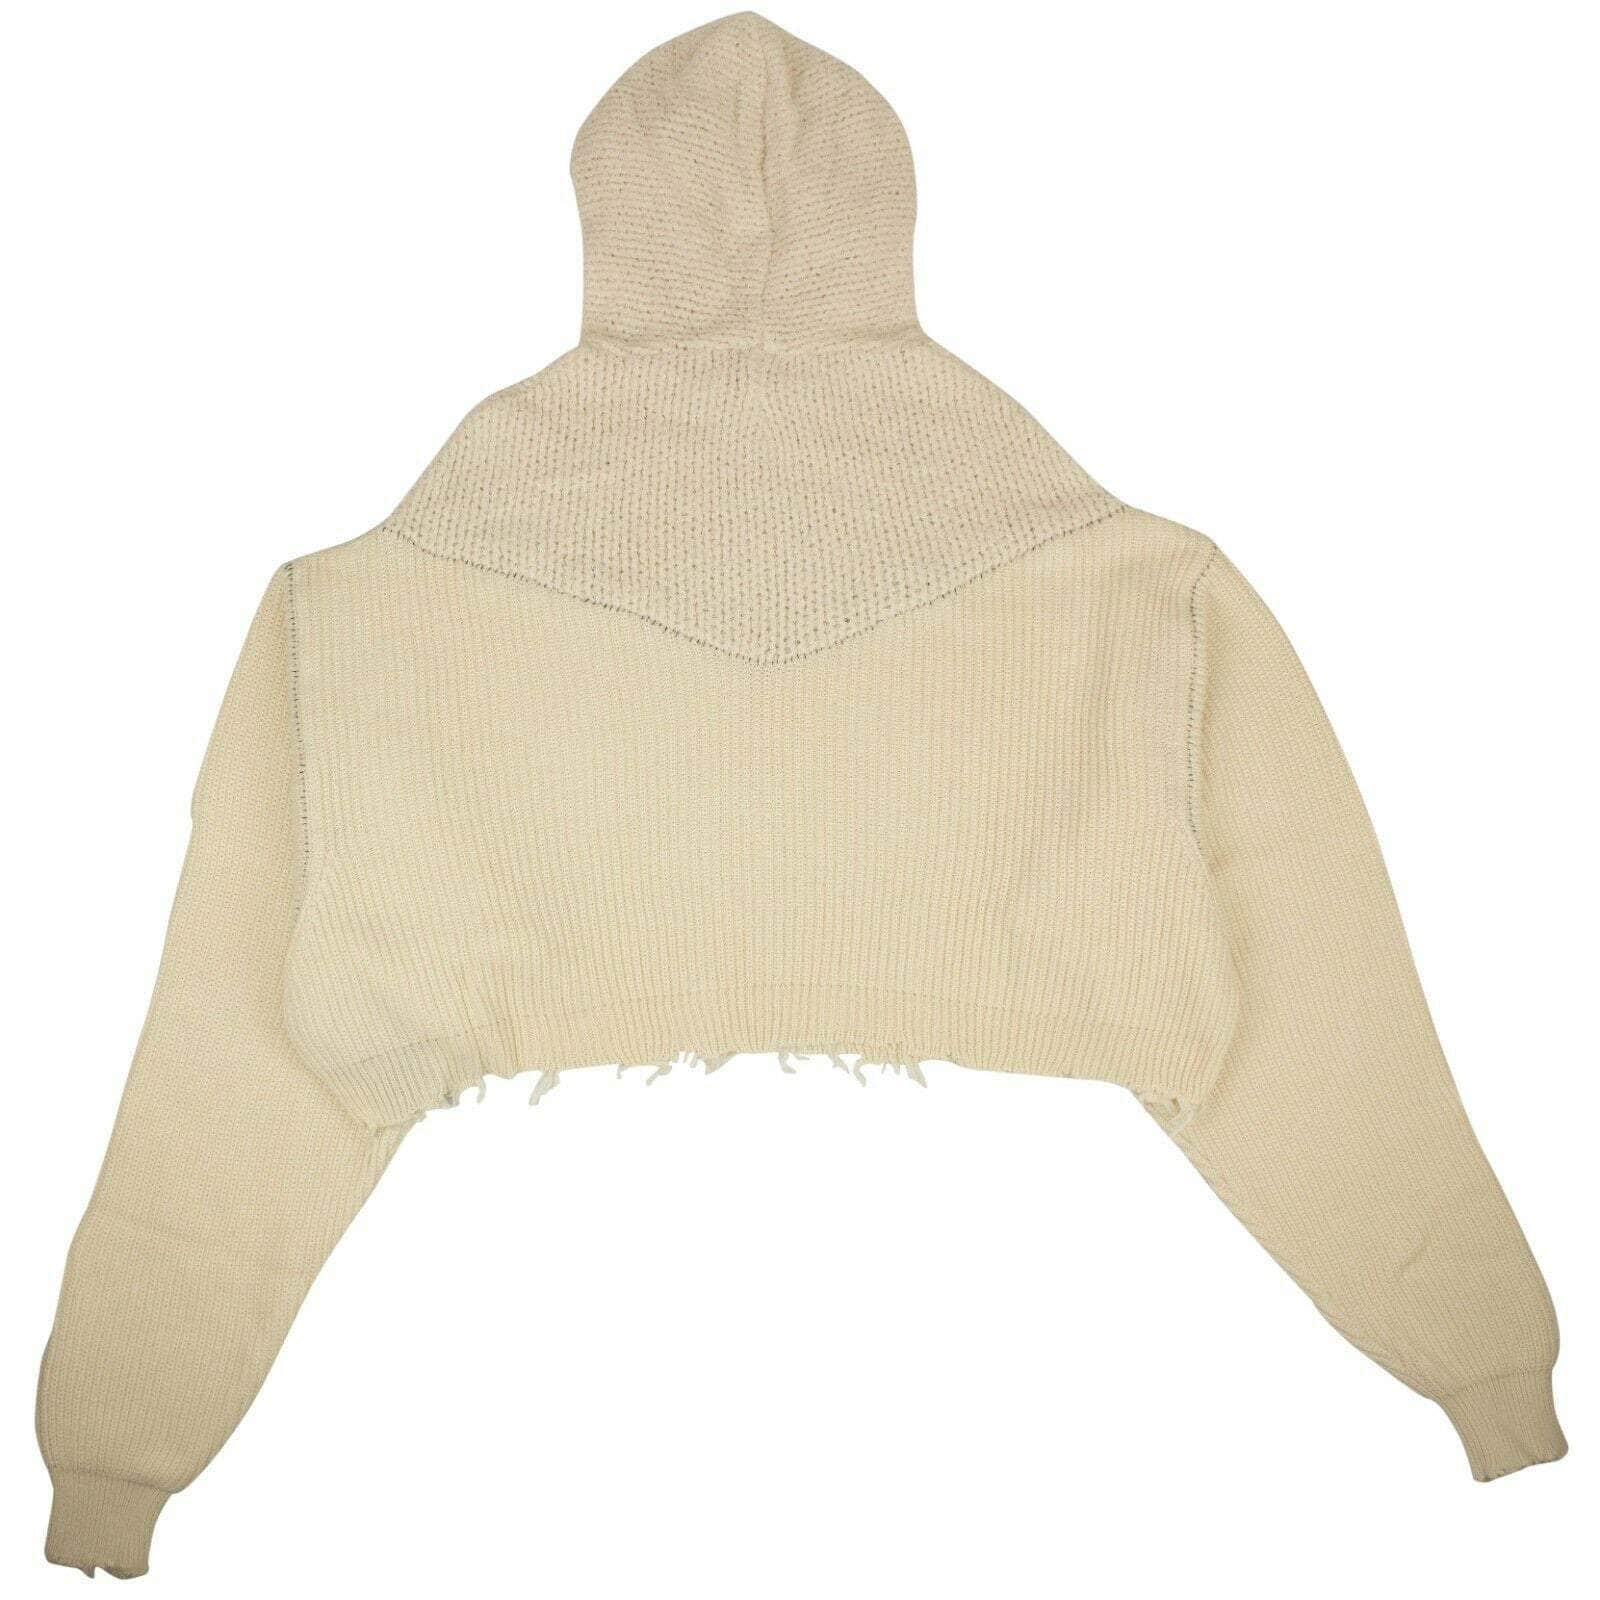 Unravel Project 250-500, channelenable-all, chicmi, couponcollection, gender-womens, main-clothing, size-xxl, unravel-project, womens-hoodies-sweatshirts XXL Women's Beige Mesh Rib Hybrid Hoodie Sweater 74NGG-UN-1115/XXL 74NGG-UN-1115/XXL